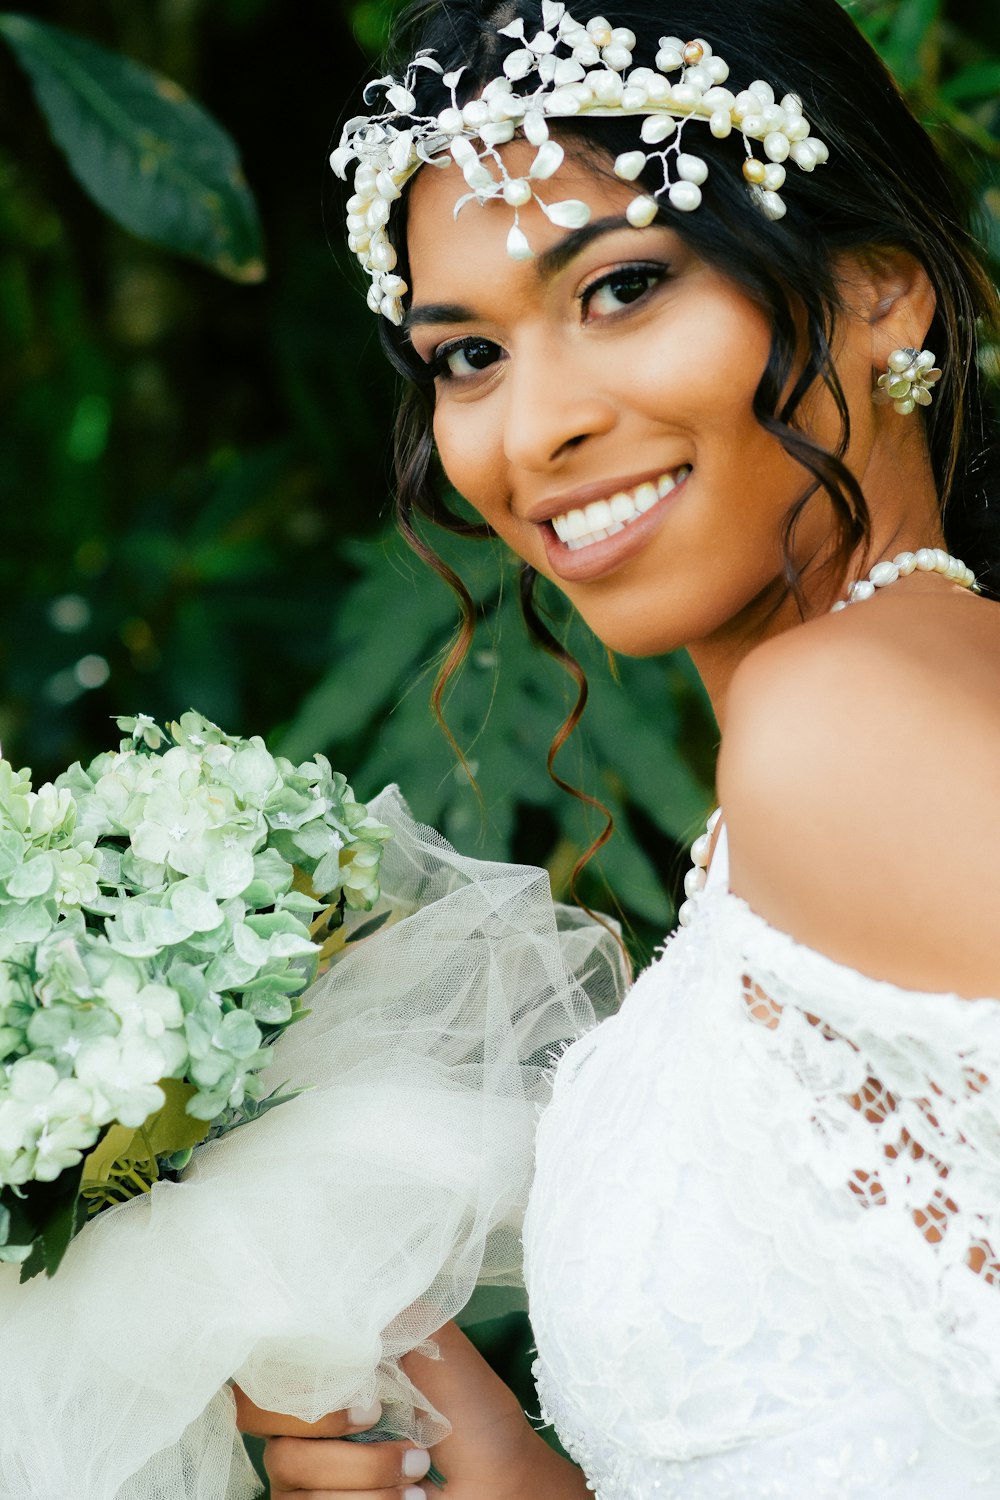 Smiling woman in white floral dress wearing white floral crown photo – Free  Heredia Image on Unsplash